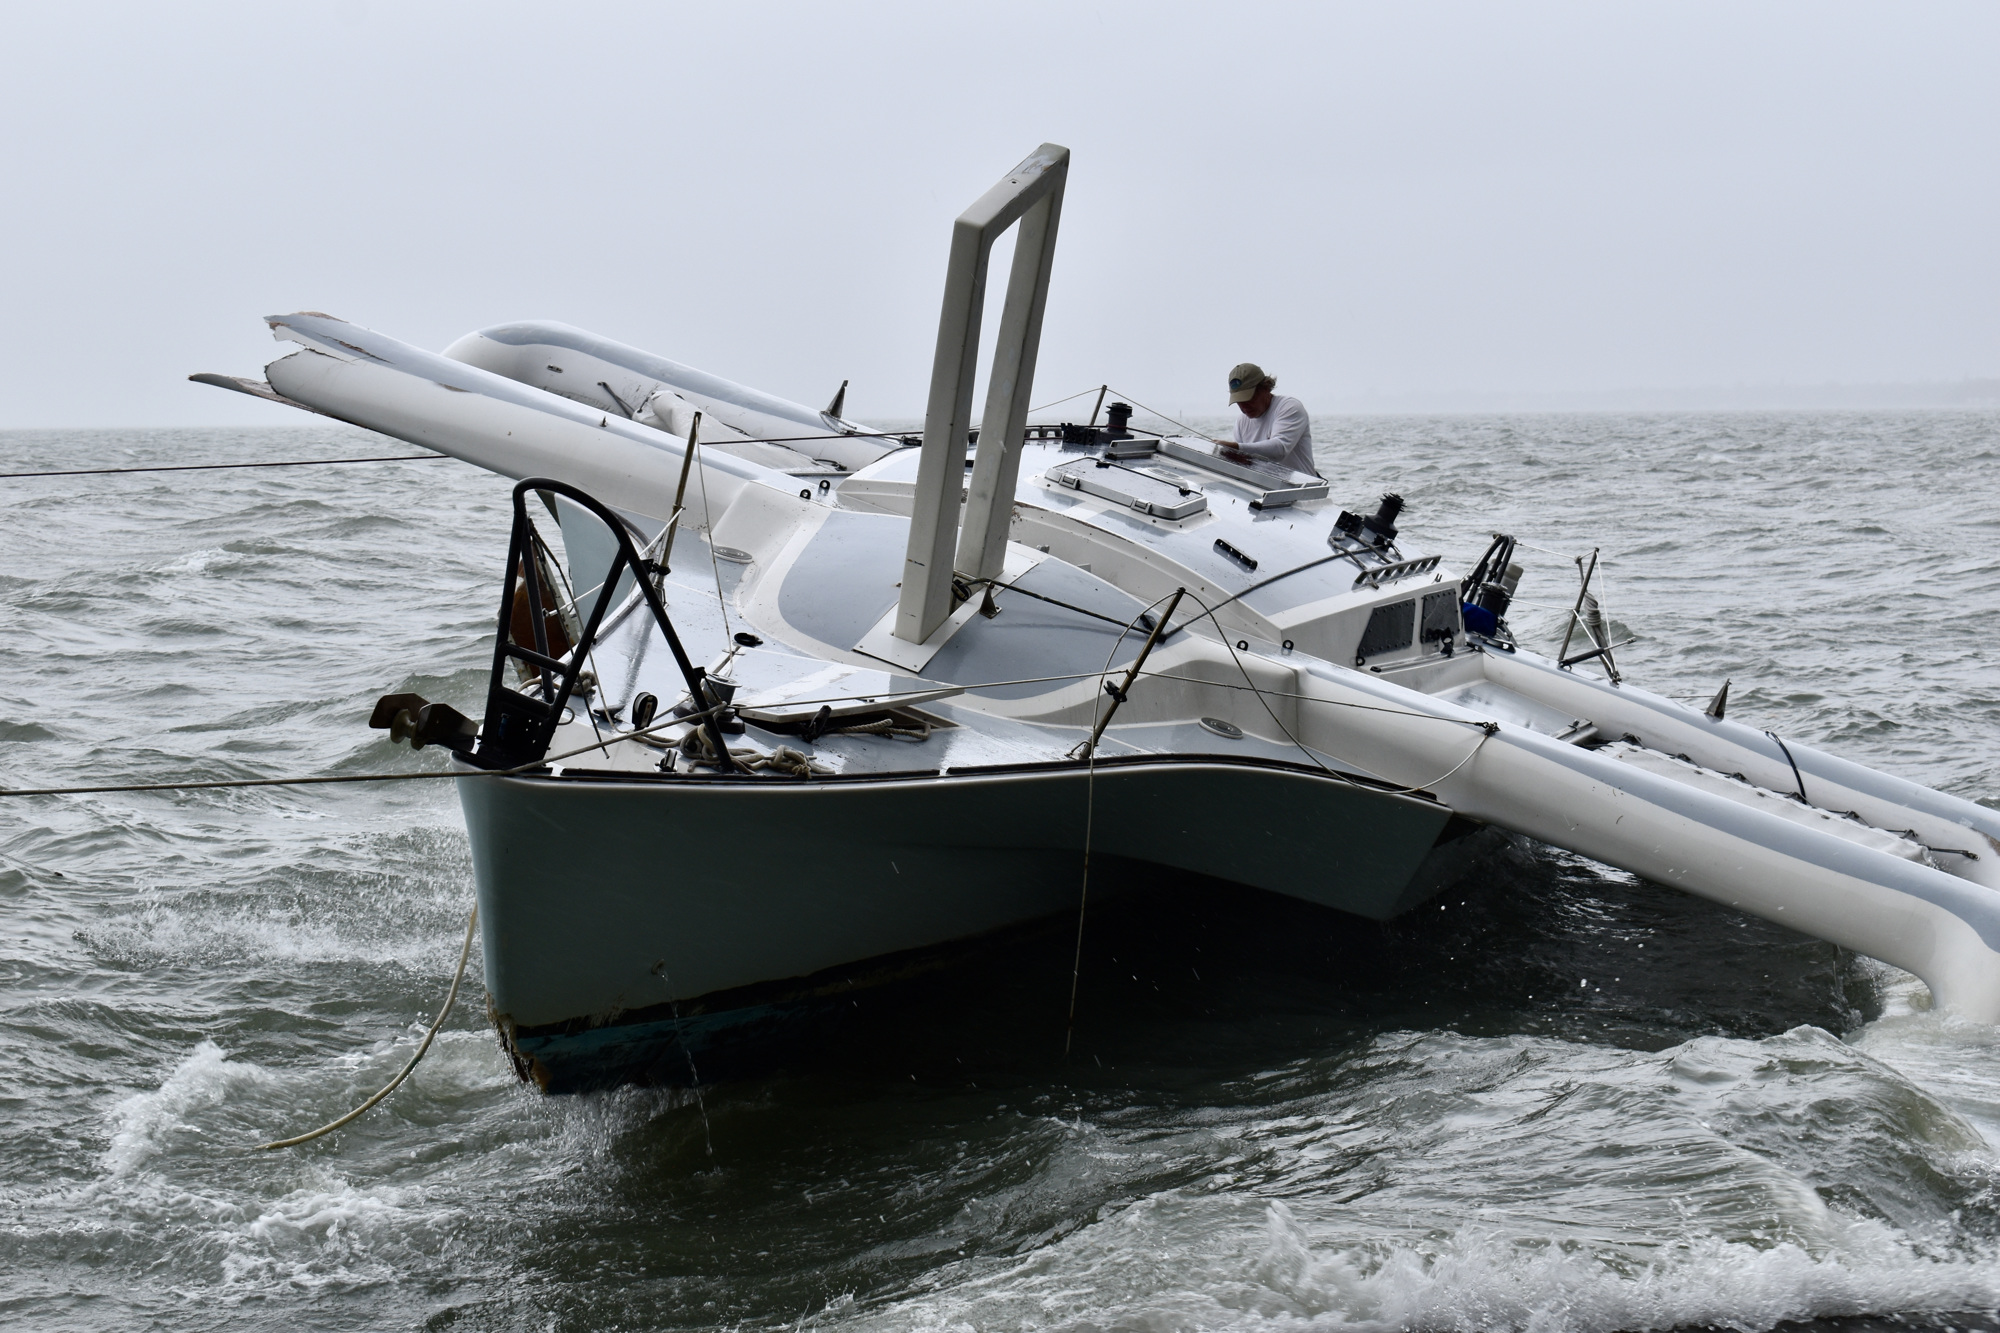 A man aboard a trimaran sailing boat works with a crew on shore to secure the vessel after it was driven against the seawall at Hart's Landing. (Eric Garwood)